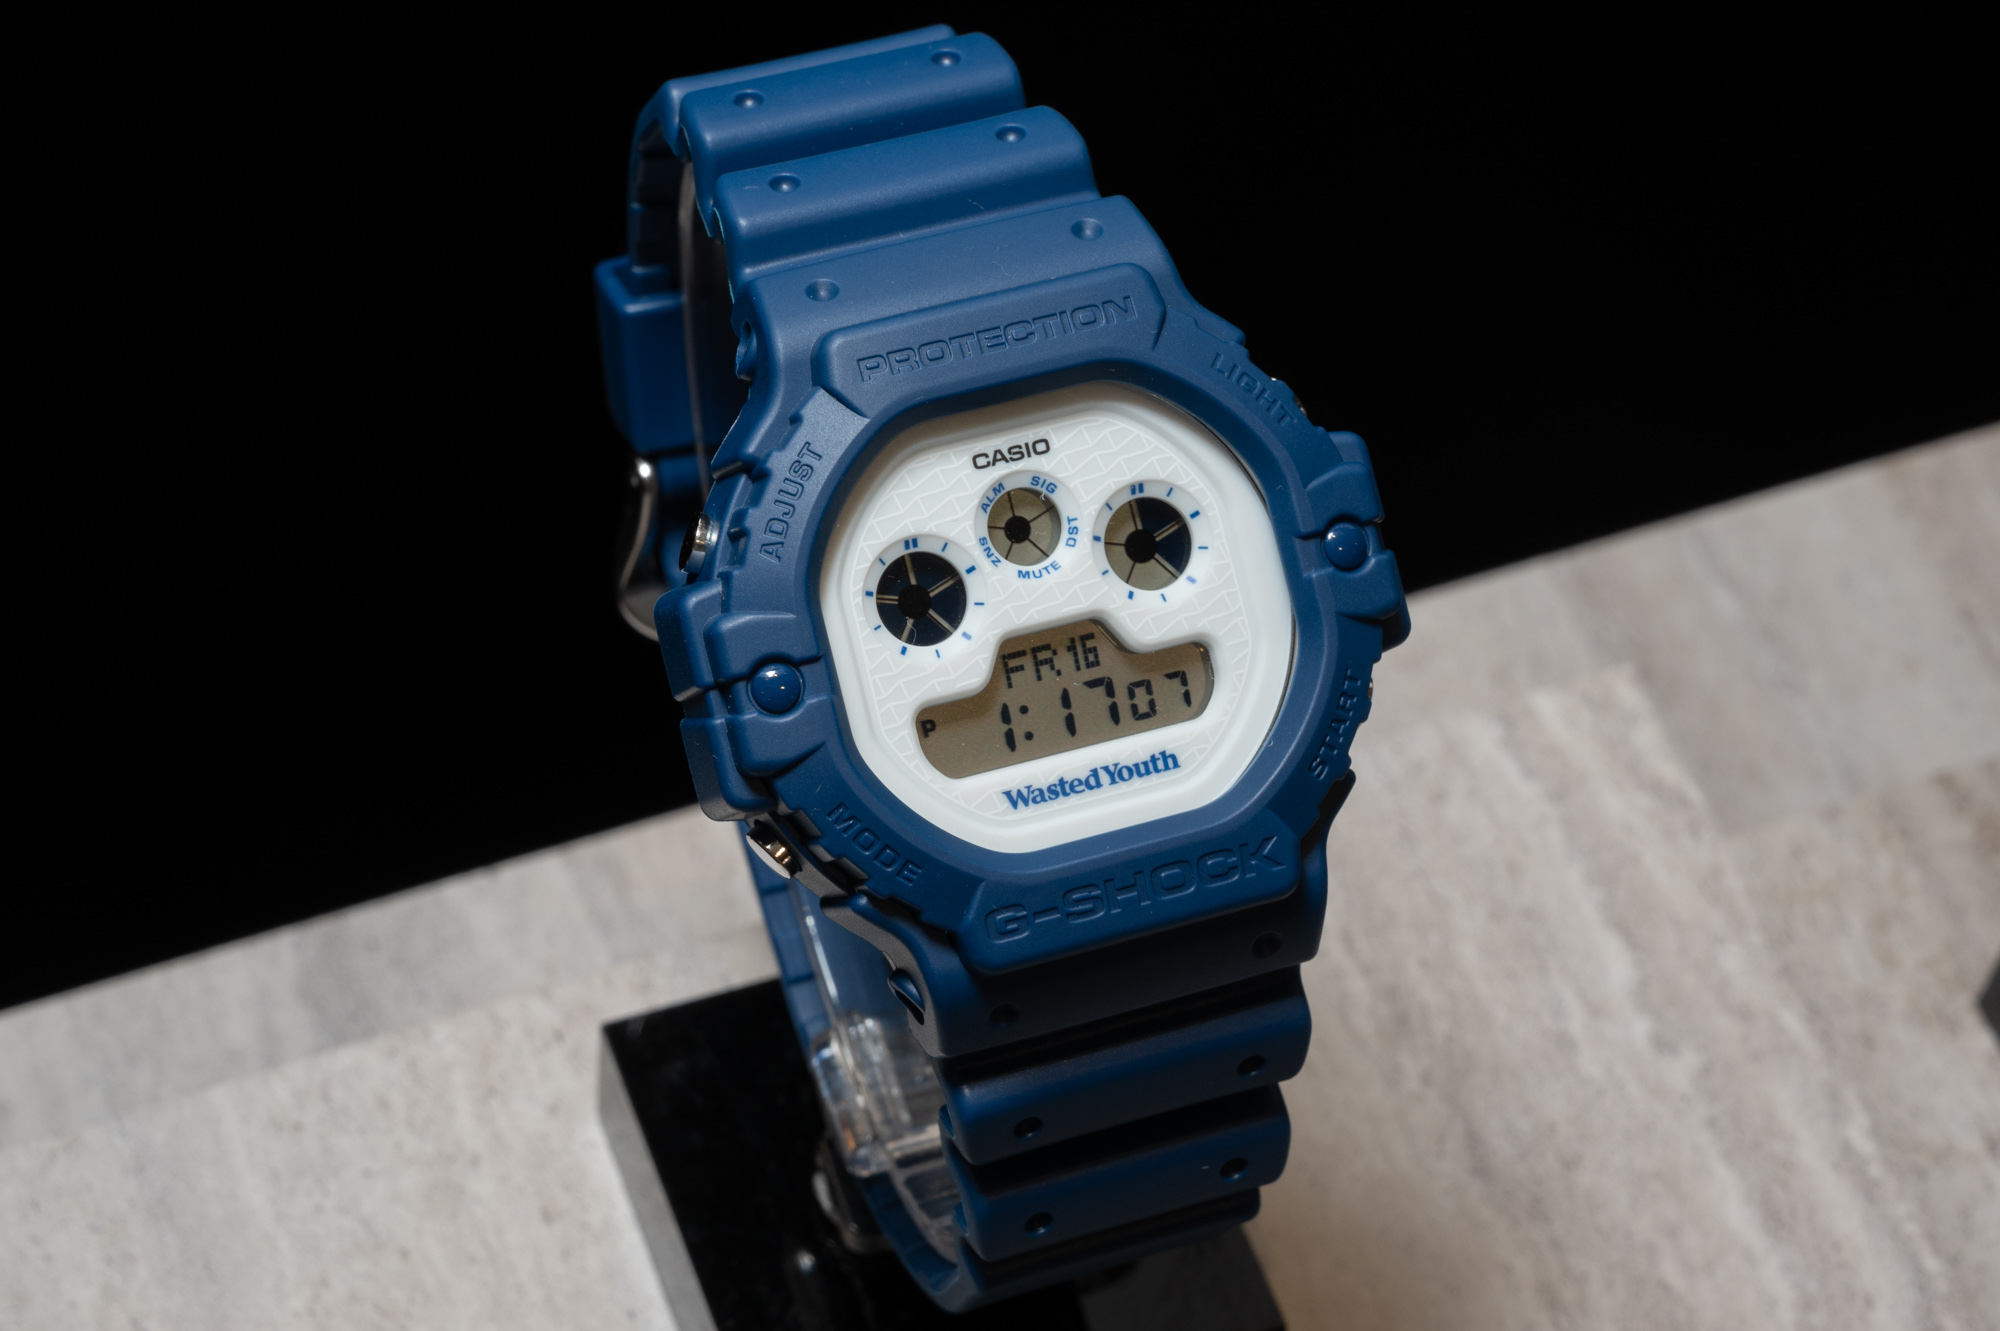 GSHOCK Wasted Youth コラボ DW-5900WY-2JR 腕時計(デジタル)